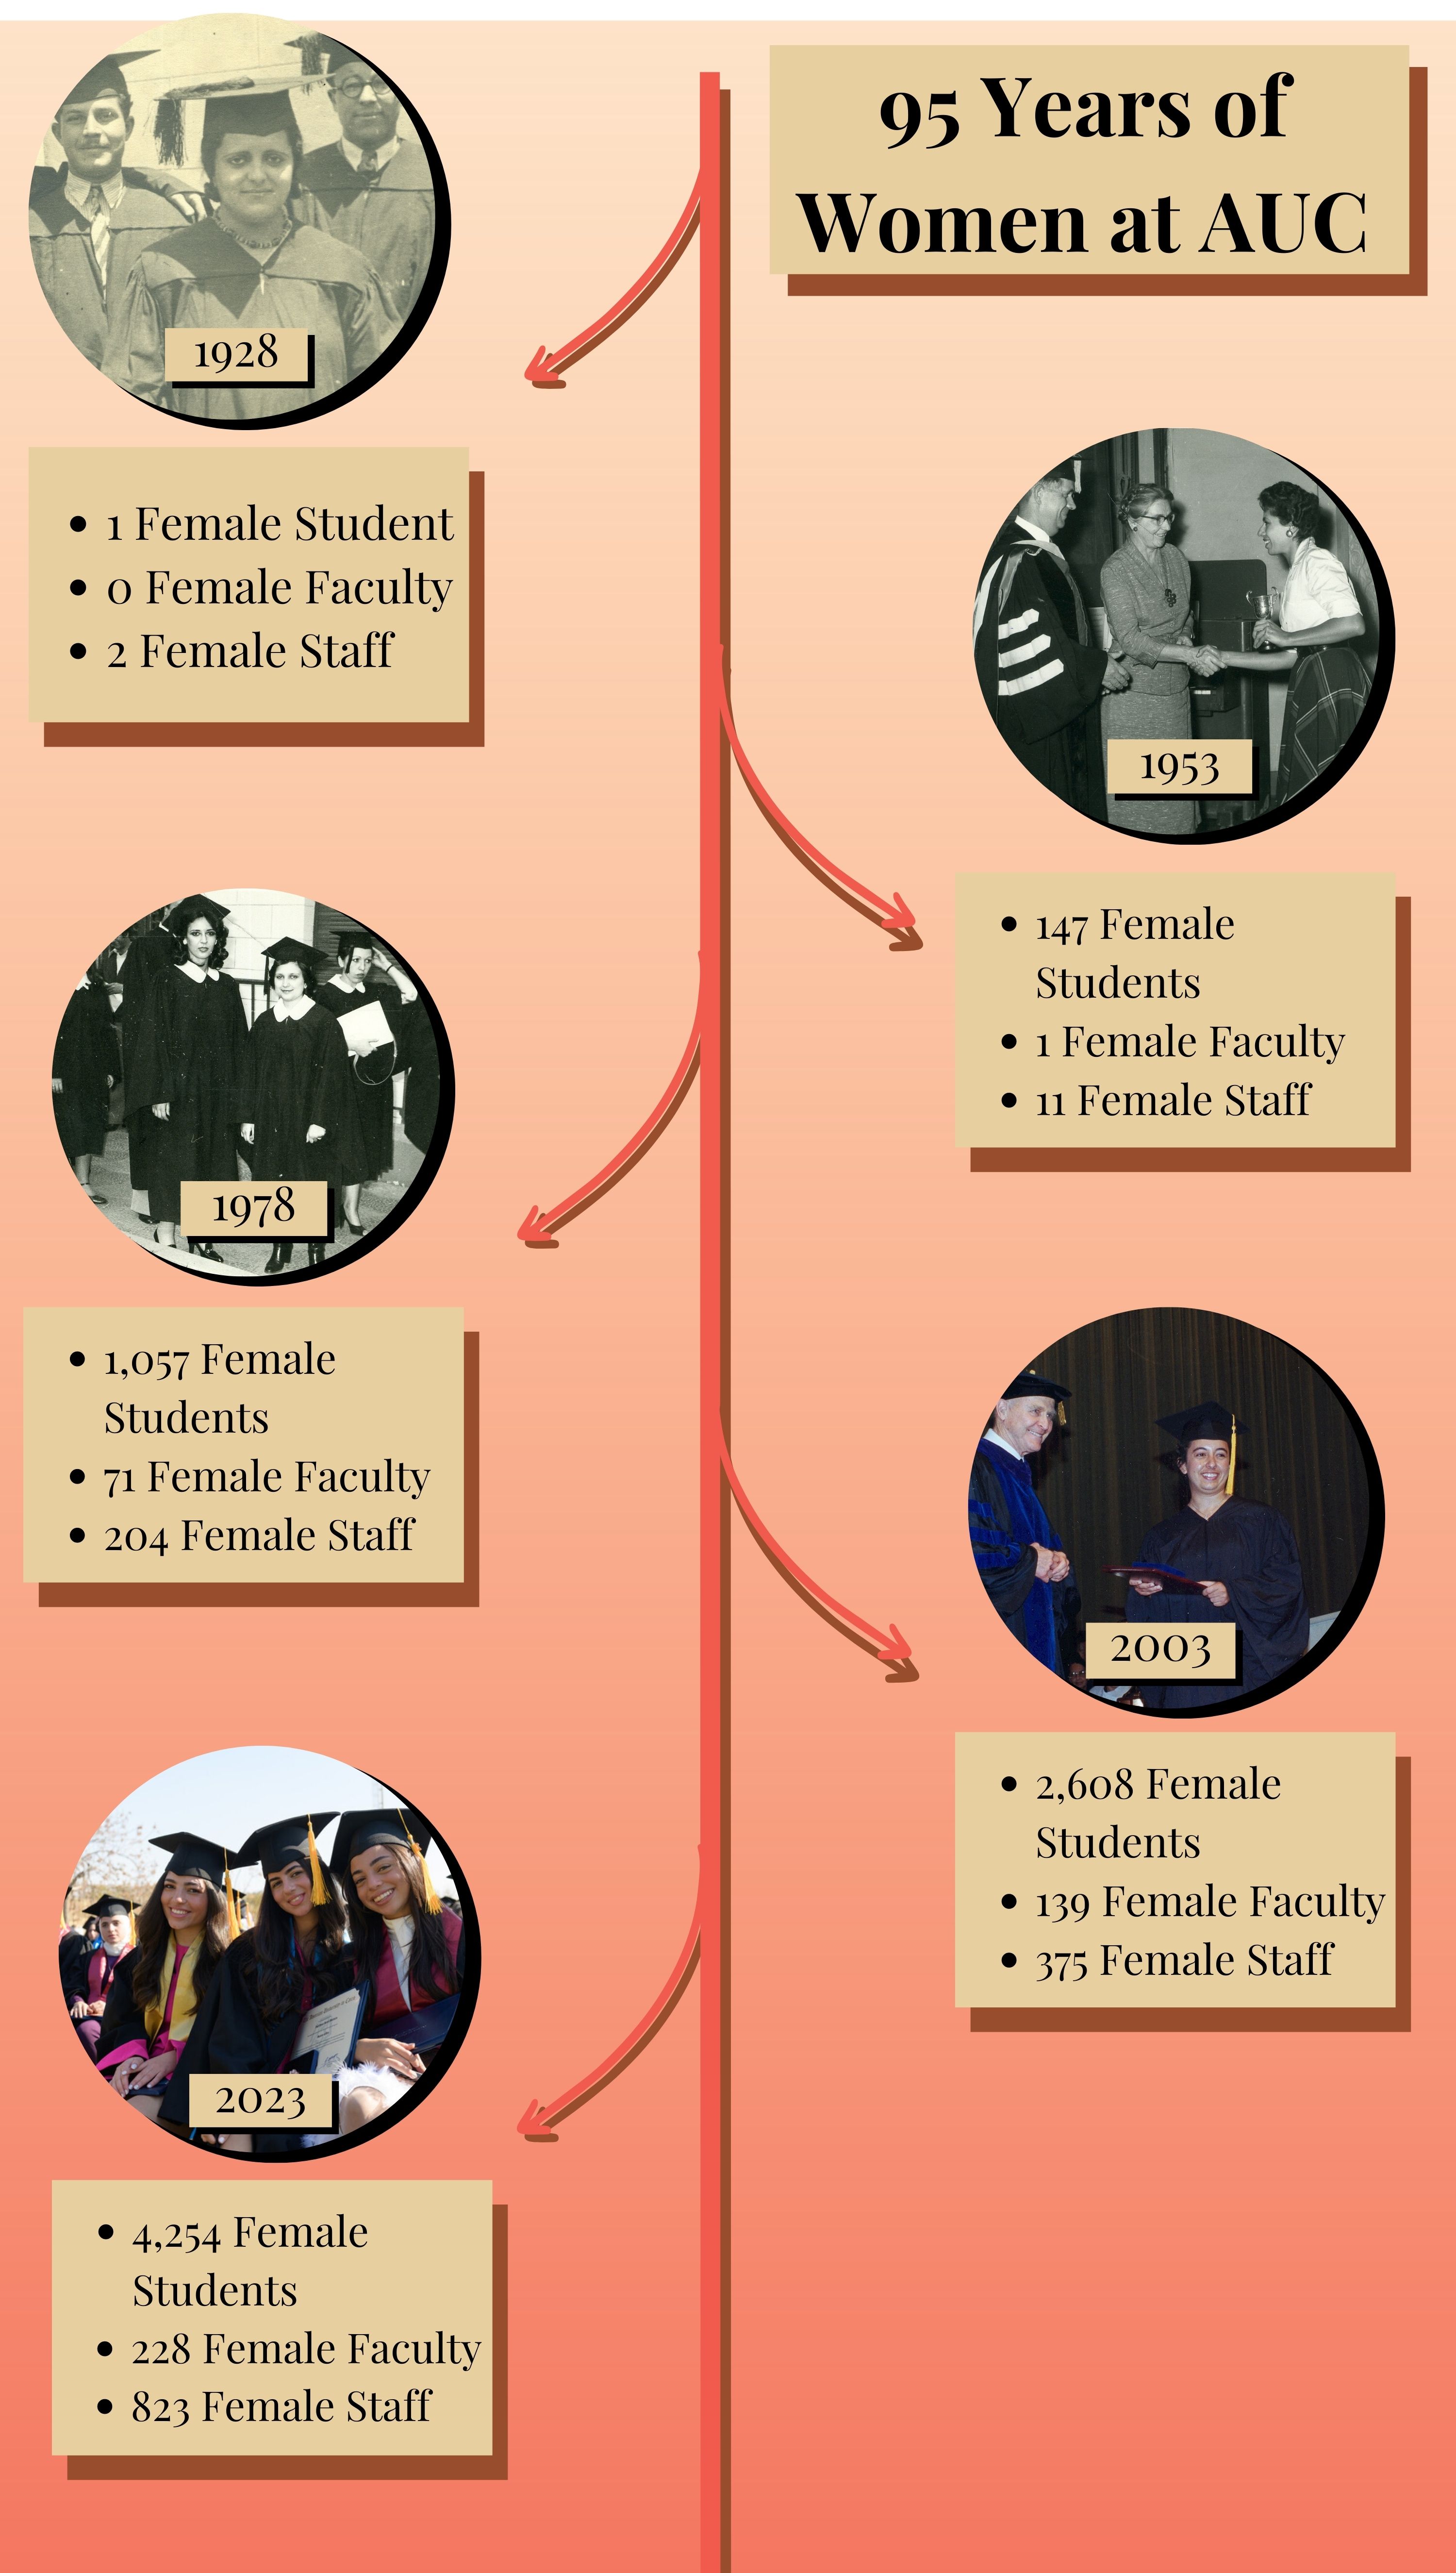 Infographic with a light brown box and black text at the top right hand side: “95 Years of Women at AUC.” On the top left, a photo of Eva Habib El Masri ‘31, with a light brown text box below it and the words “1 Female Student, 0 Female Faculty, 2 Female Staff.” Below on the right, a black and white photo of two AUC women wearing black caps and gowns, graduating in 1953,  with a light brown text box below it and the words, “147 Female Students, 1 Female Faculty, 11 Female Staff.” Below on the left, a black and white photo of a female student in 1978 receiving an award, with a light brown text box below it and the words “2,608 Female Students, 139 Female Faculty, 375 Female Staff.” Below it on the right, a color photo of a woman graduating and wearing a cap and gown receiving her degree on stage in 2003, with a light brown text box below it and the words “1,057 Female Students, 71 Female Faculty, 204 Female Staff.” Below it on the right, a color photo of three young women sitting at a graduation ceremony wearing caps and gowns in 2023,  with a light brown text box below it and the words “4,254 Female Students, 228 Female Faculty.”